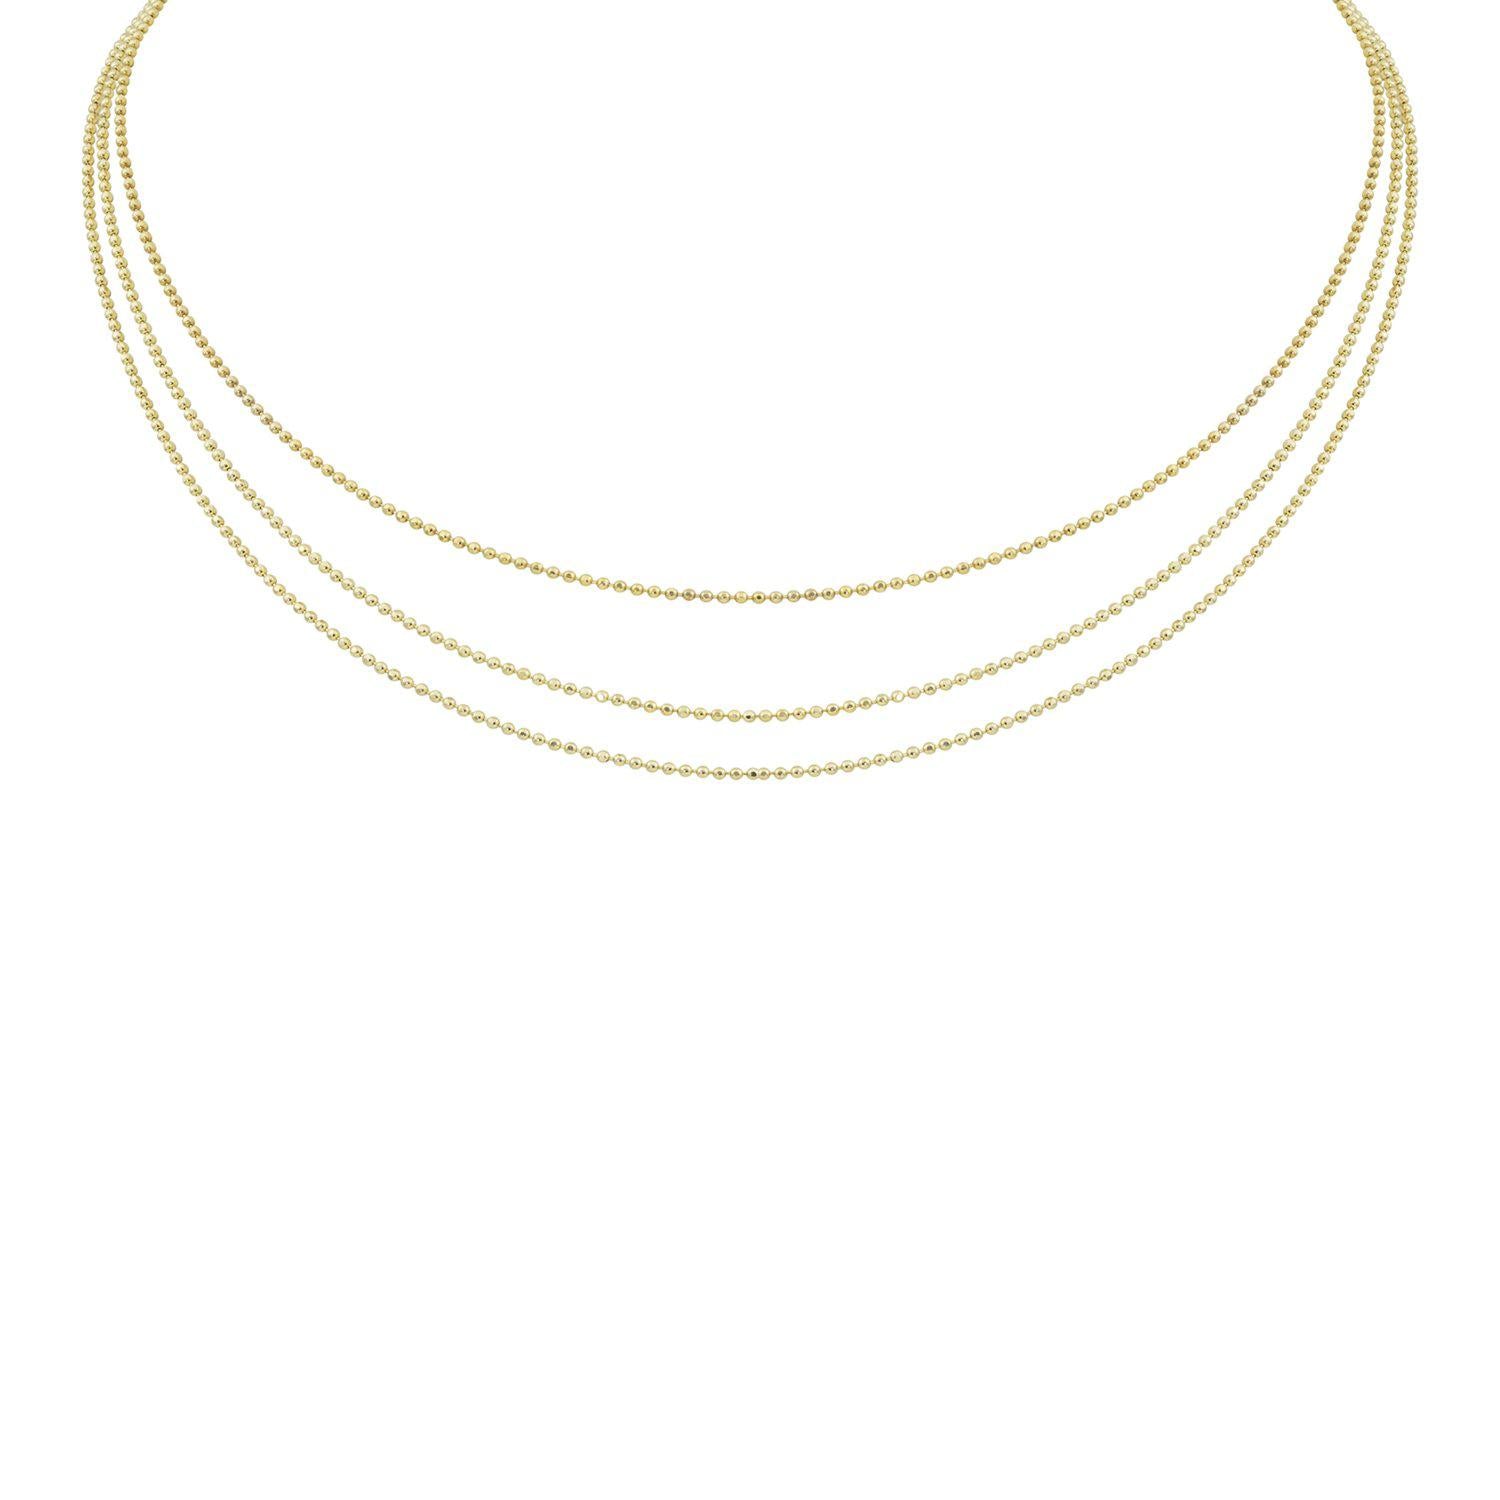 14k yellow gold CHAI necklace